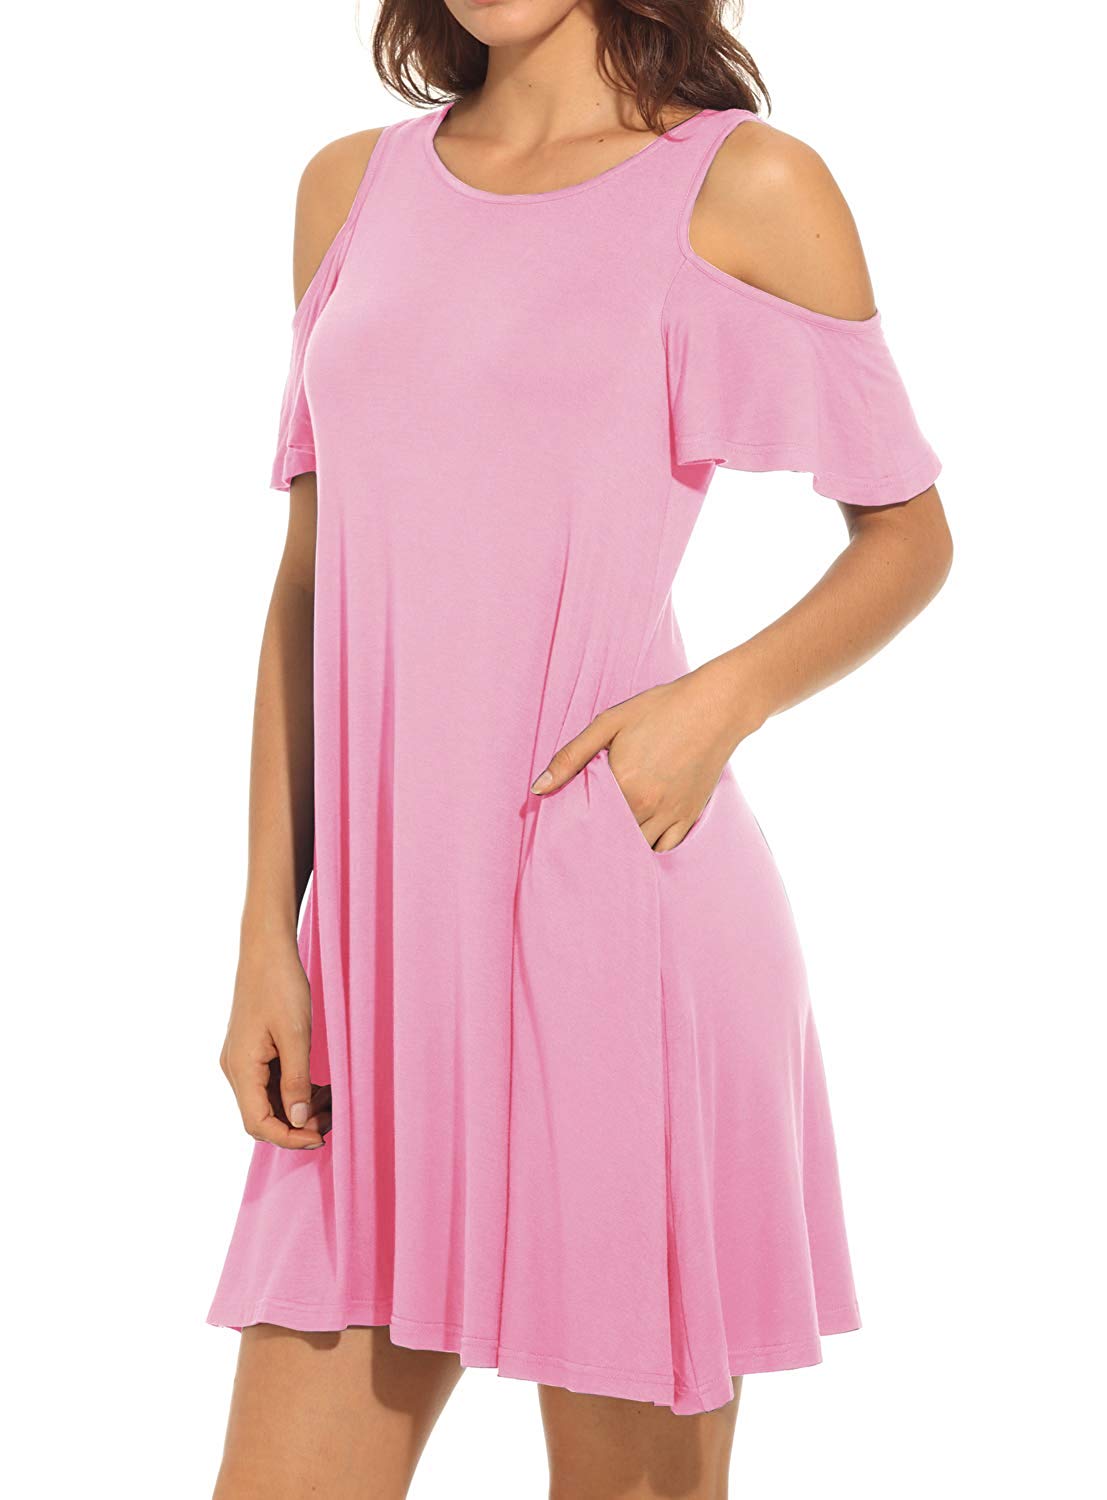 ladies fashion pink dress - loose fit ruffle sleeve cold shoulder outfit